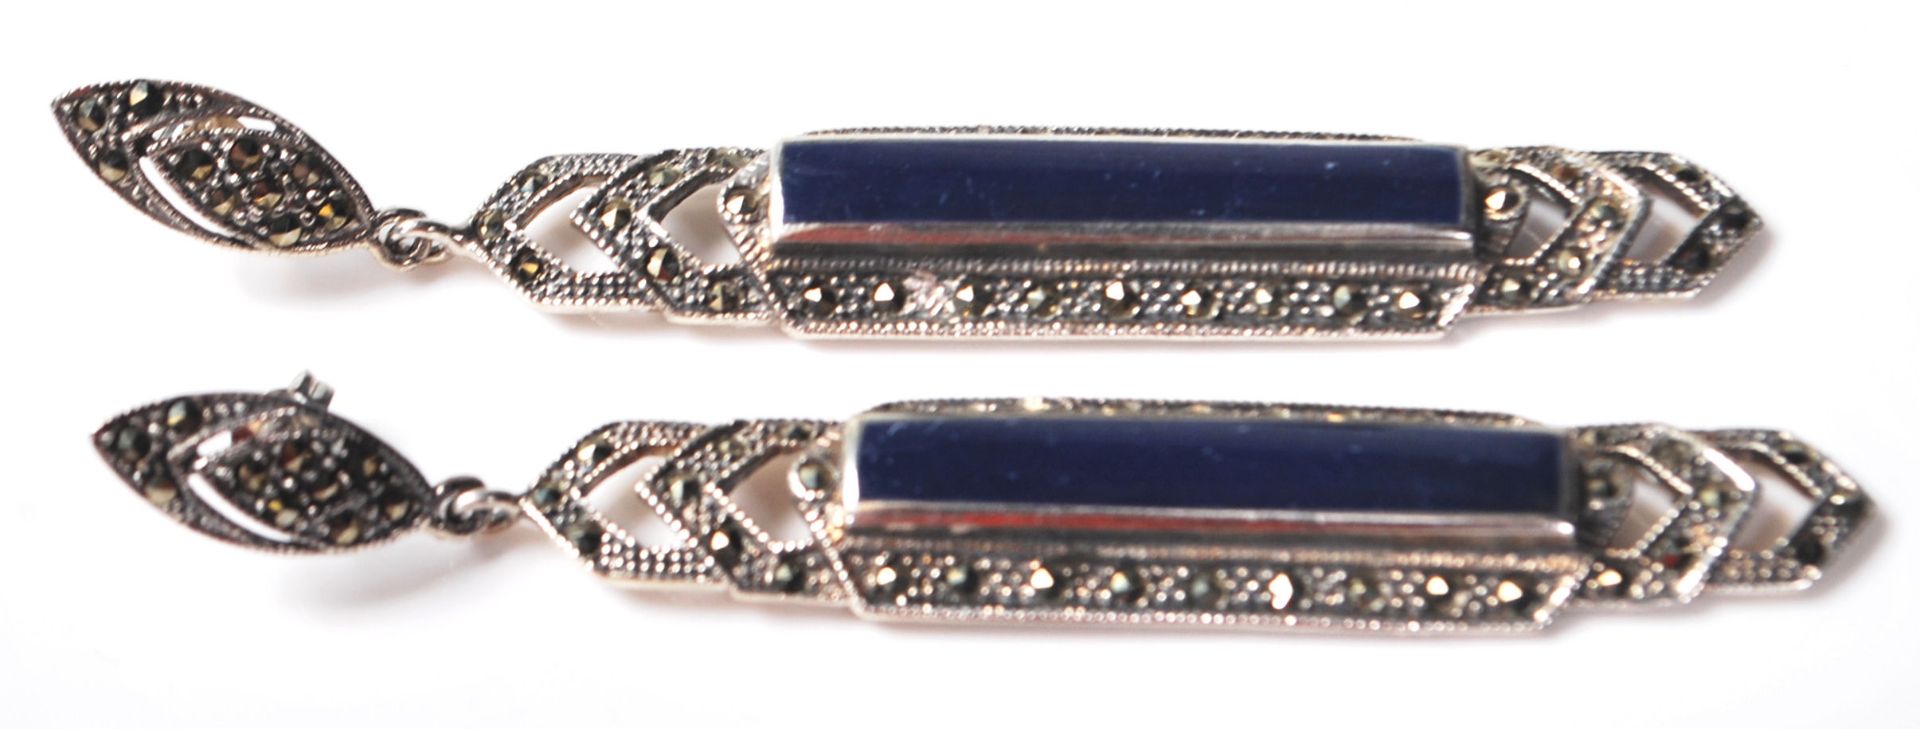 A PAIR OF STAMPED 925 SILVER ART DECO STYLE DROP EARRING SET WITH LAPIS LAZULI